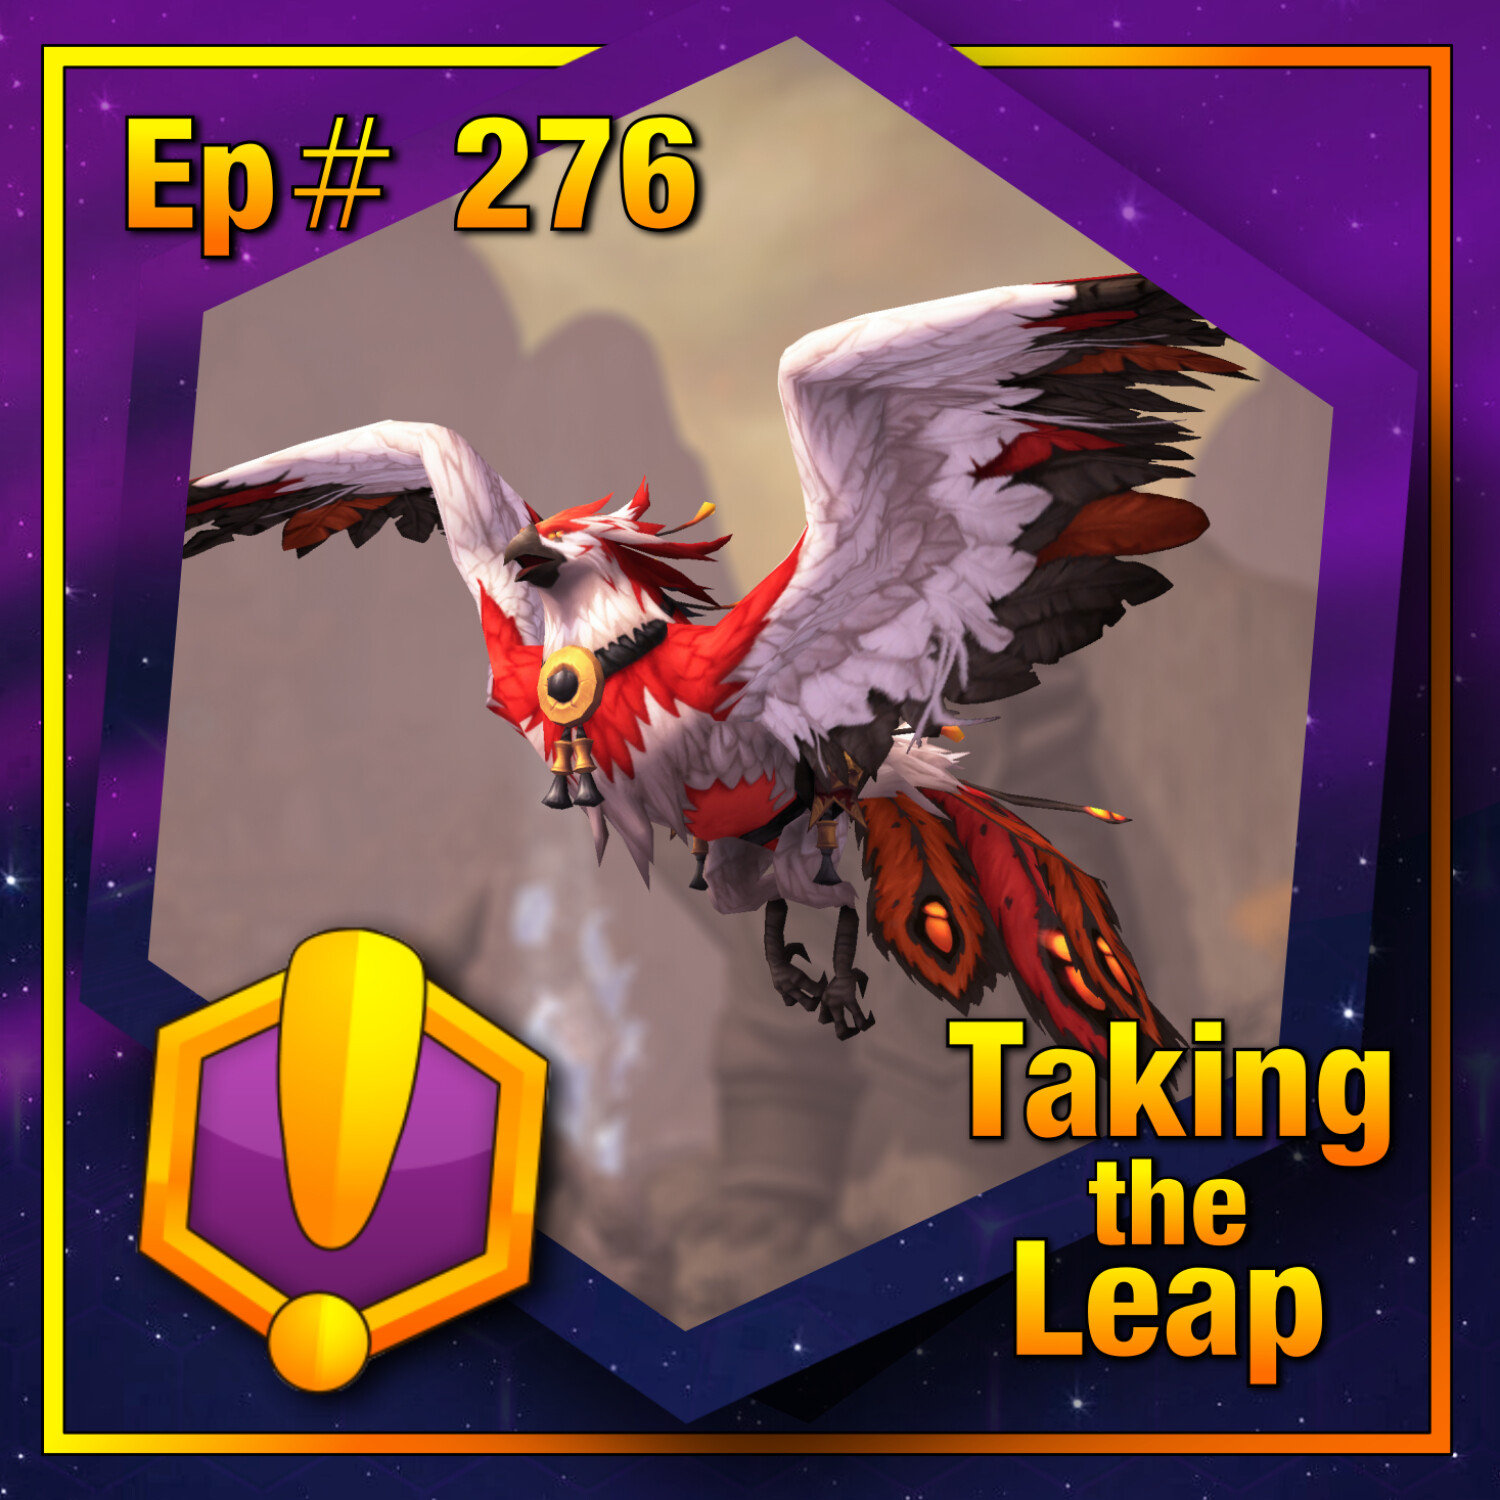 #276 - For Azeroth!: “Taking the Leap”